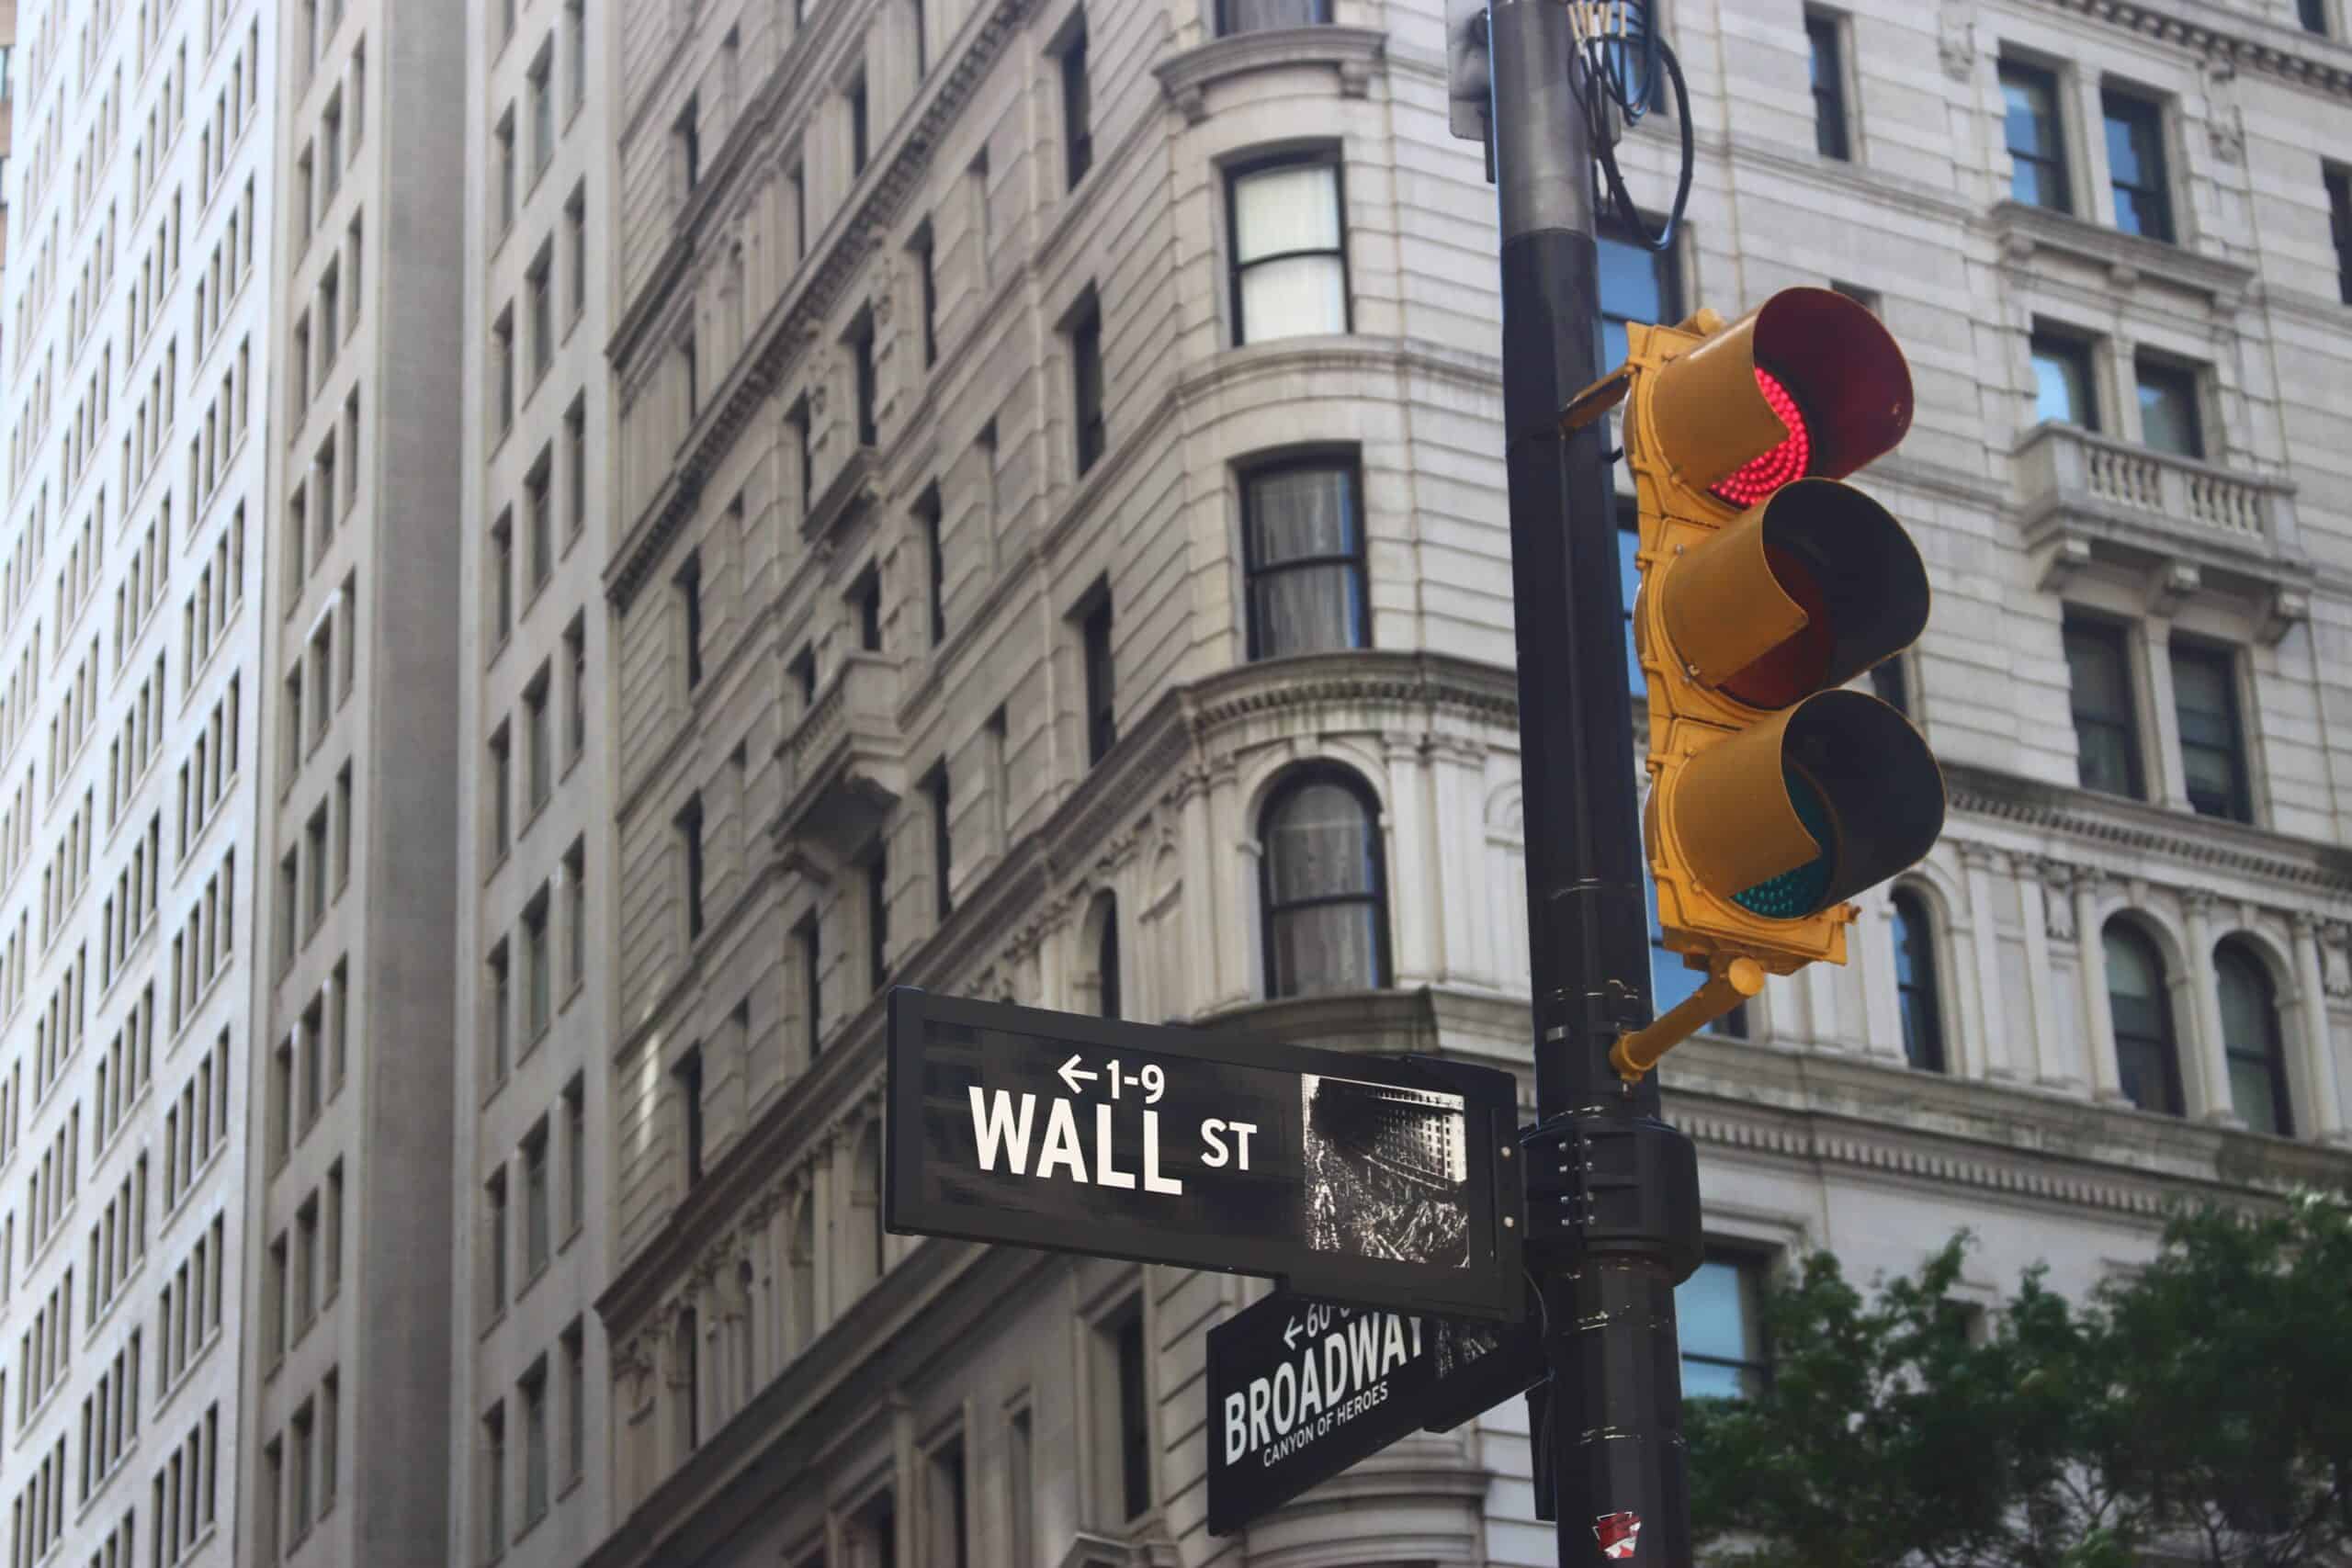 Wall street sign mounted on traffic light